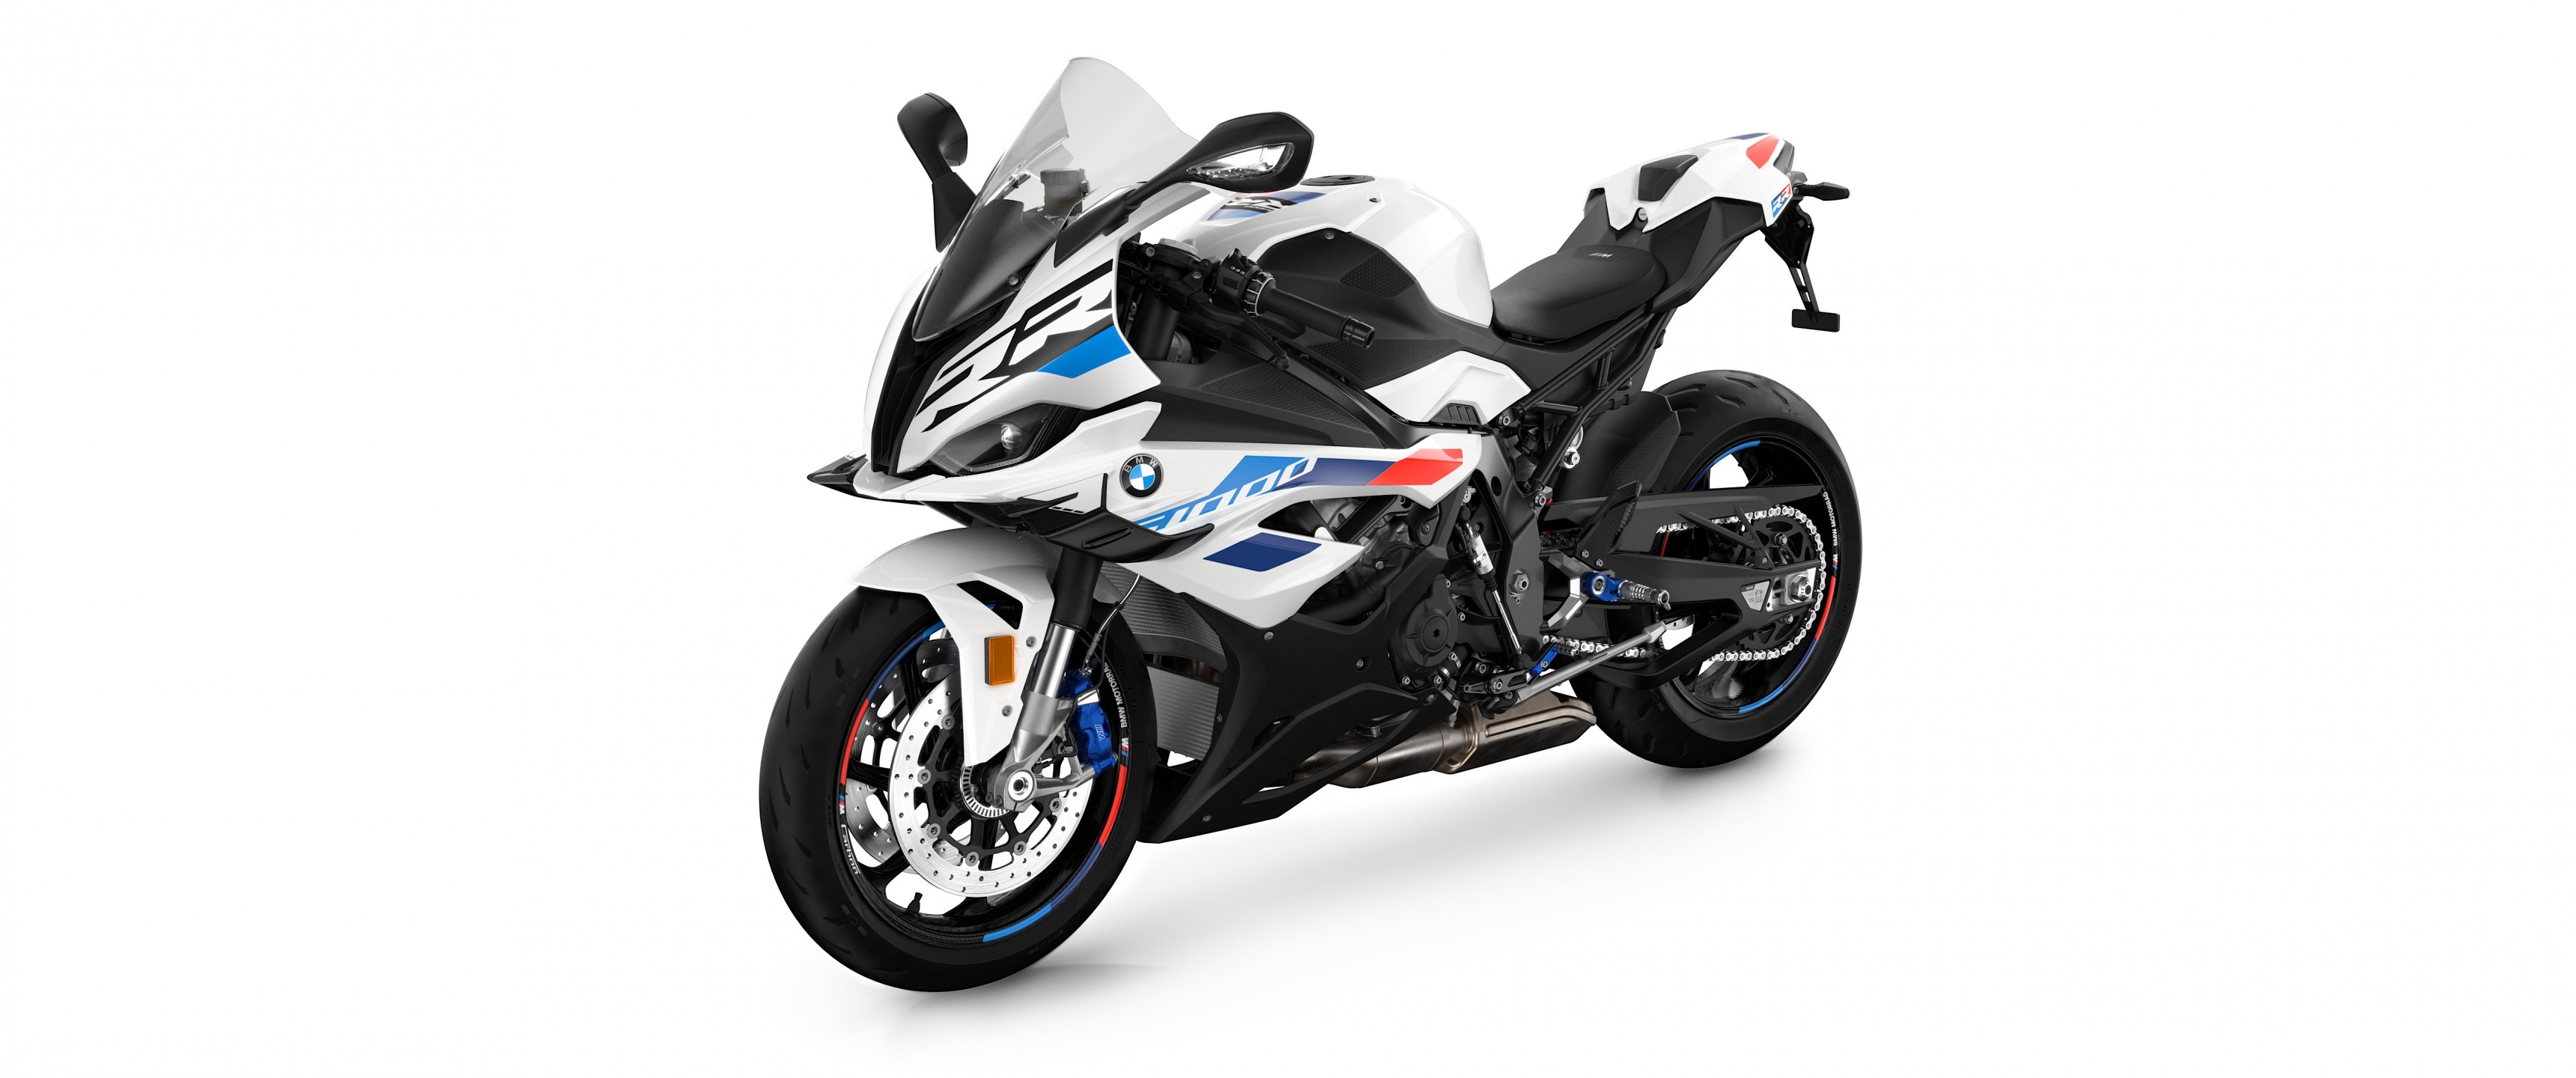 Bmw s1000rr wallpaper by Ashrs200  Download on ZEDGE  8515